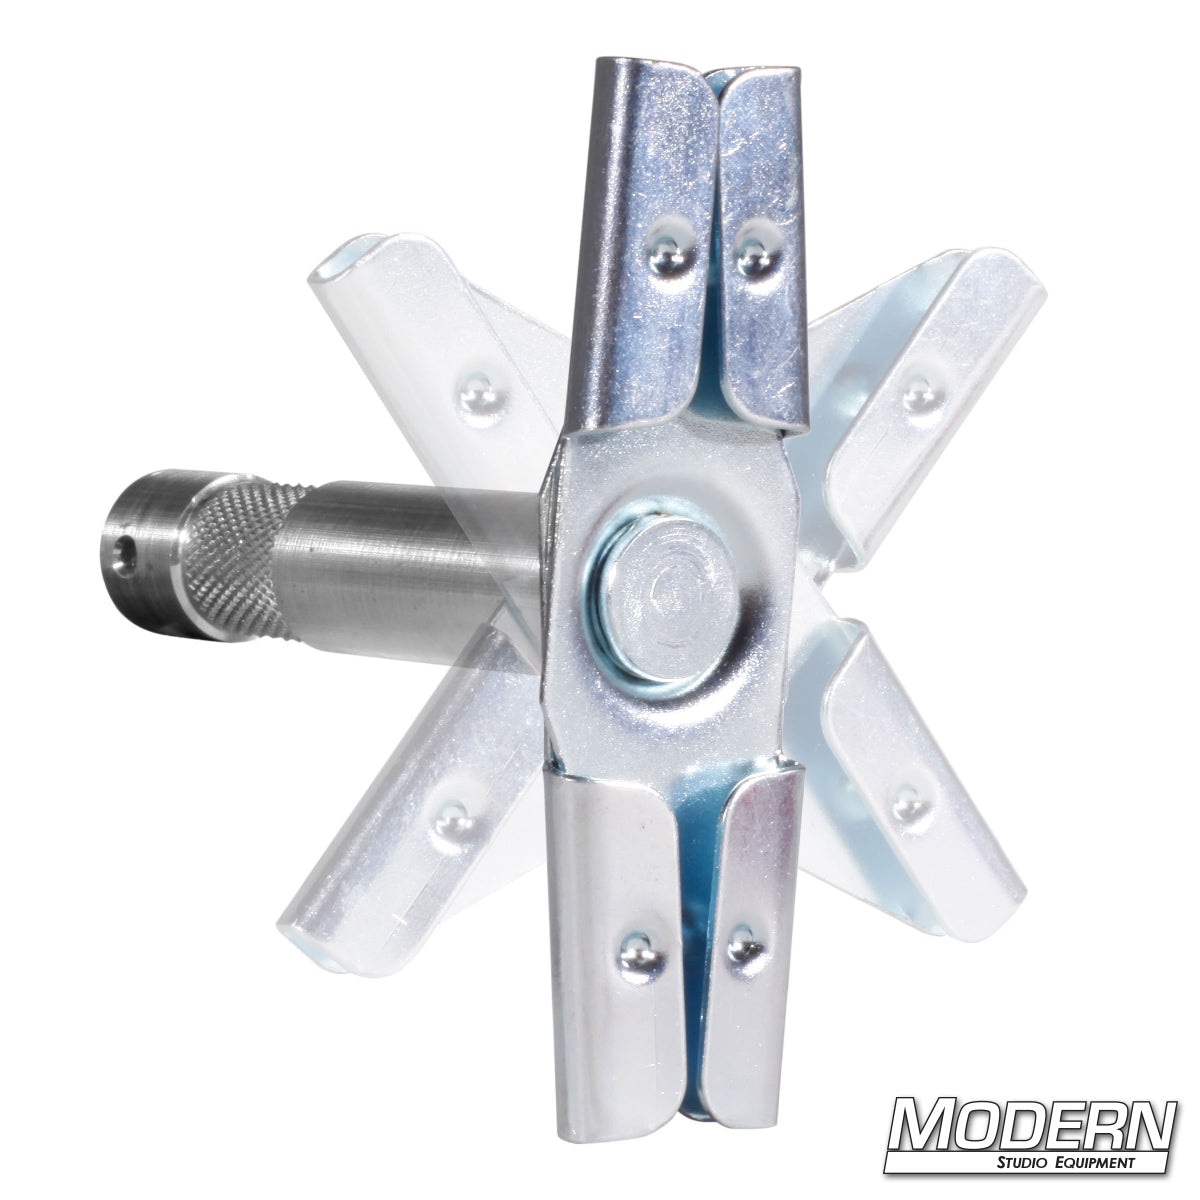 Drop Ceiling Scissor Clip with Cable Support